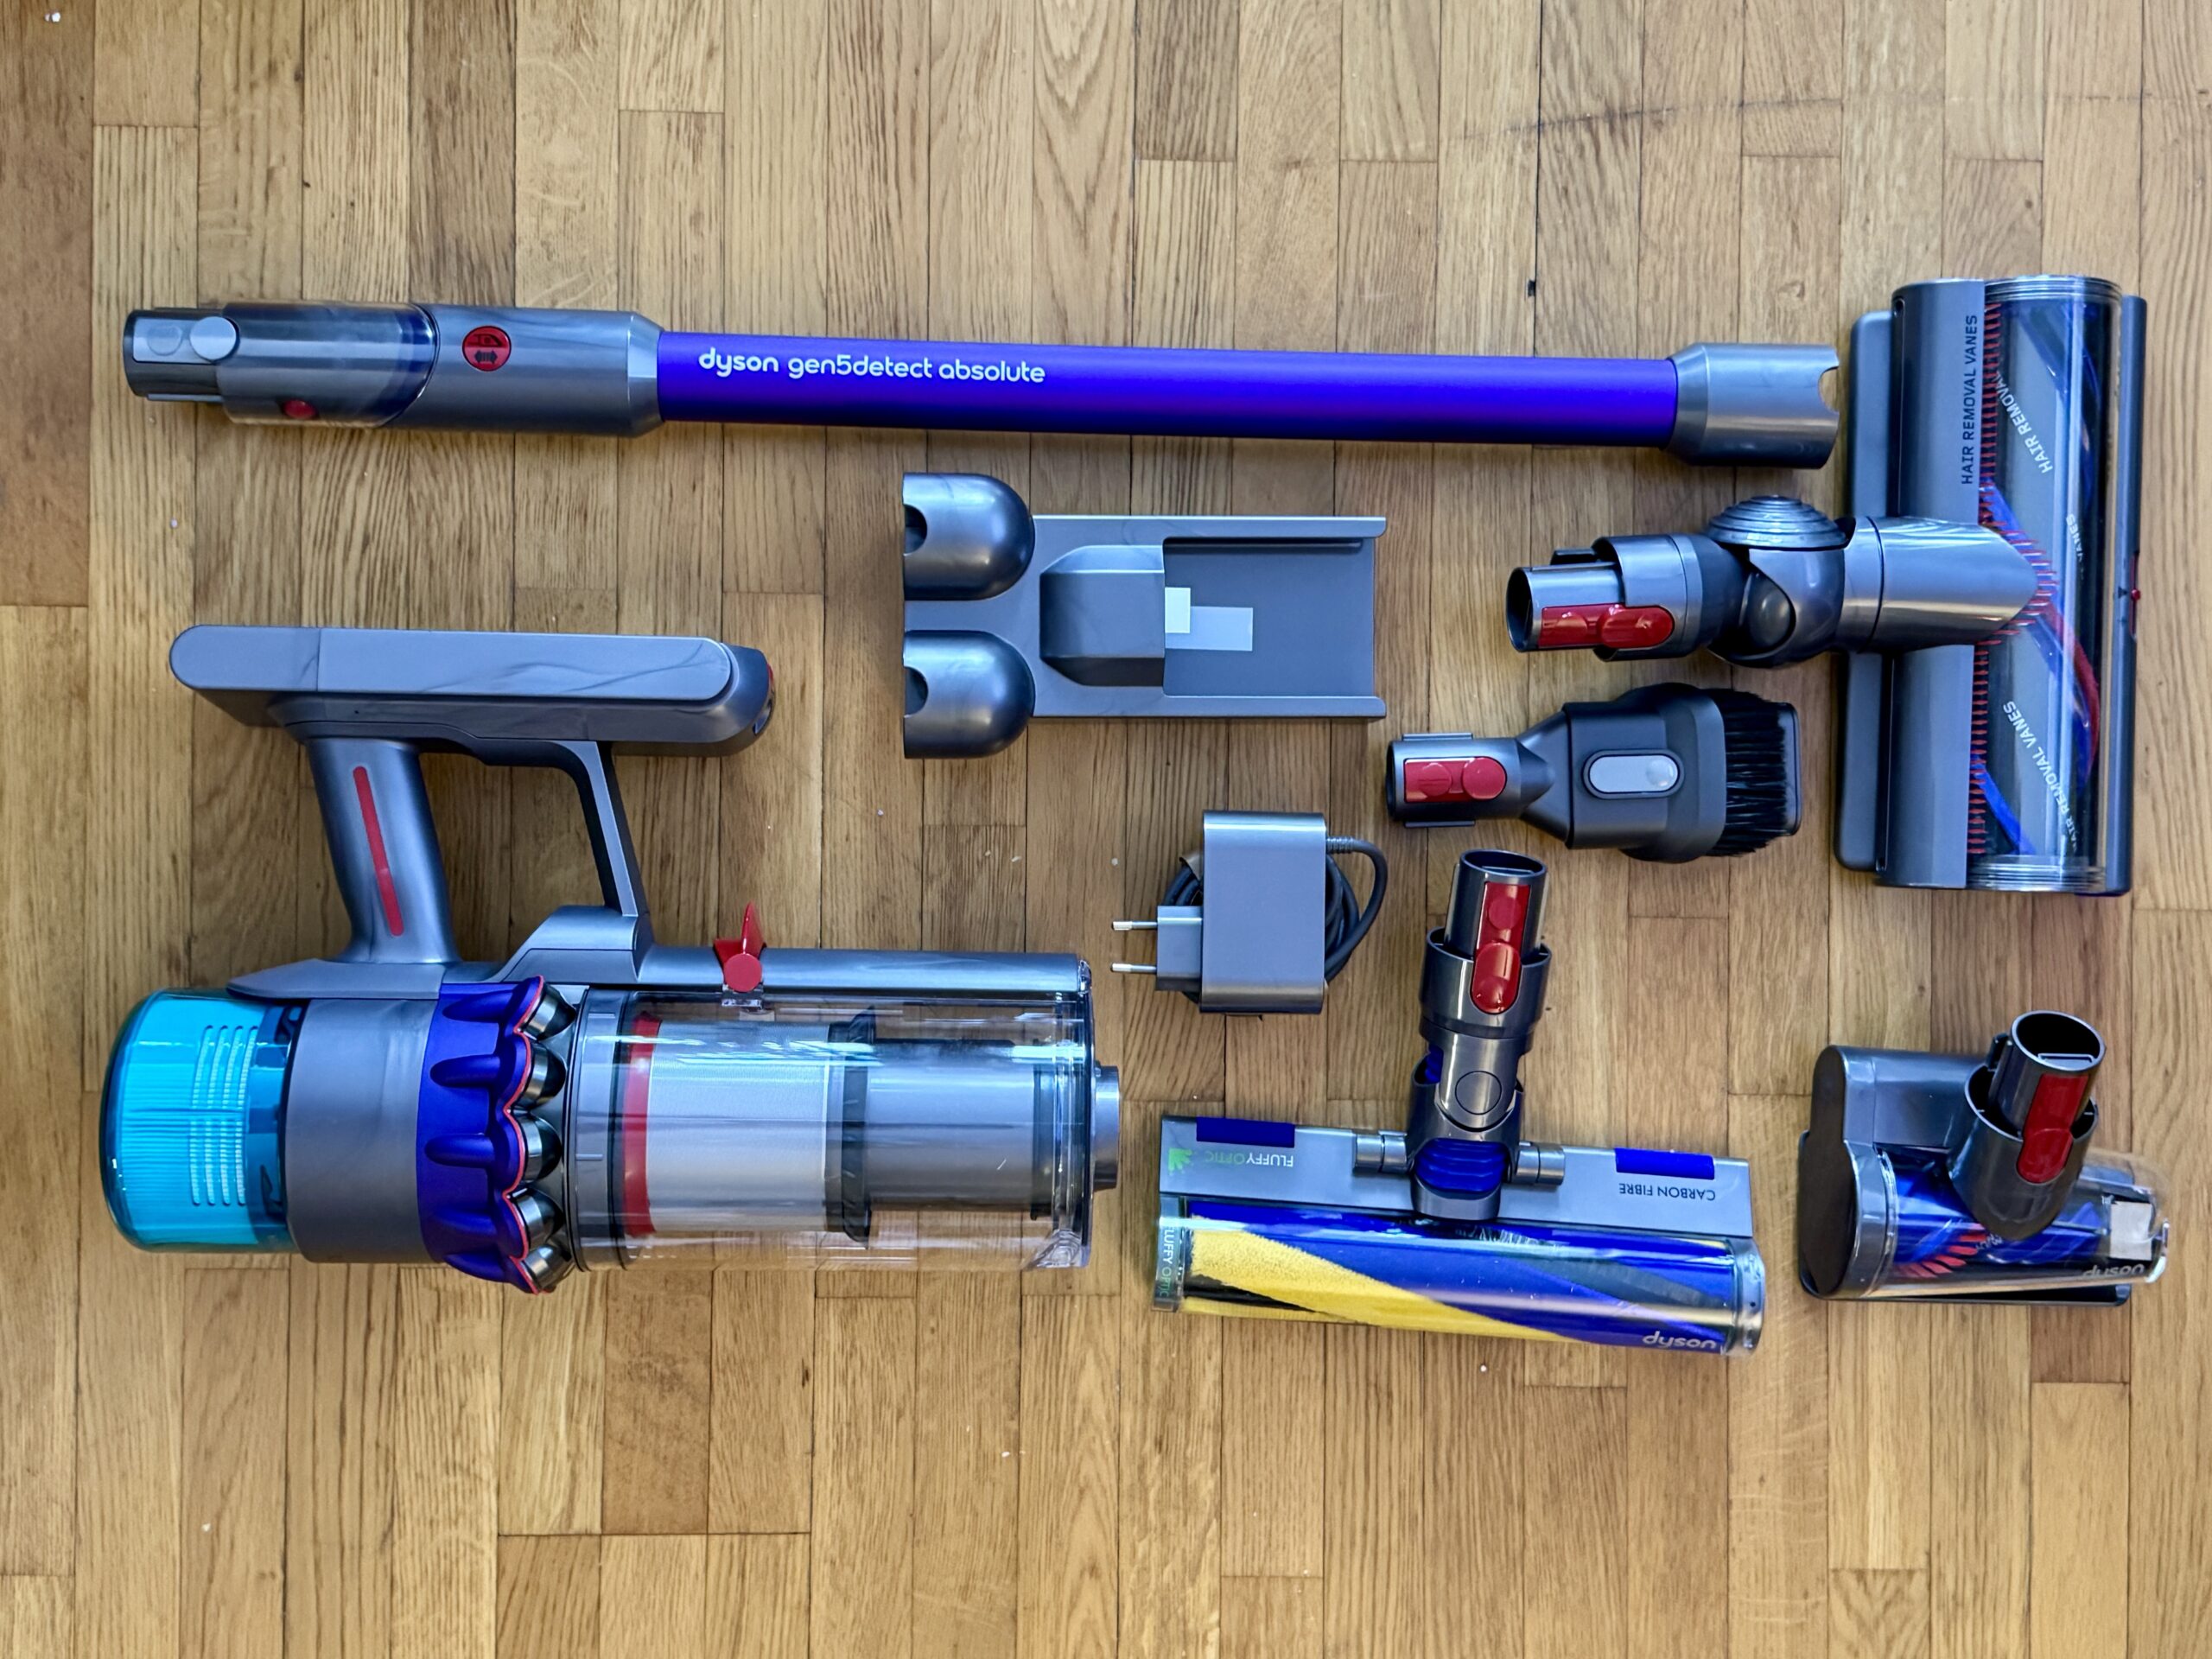 dyson contents scaled